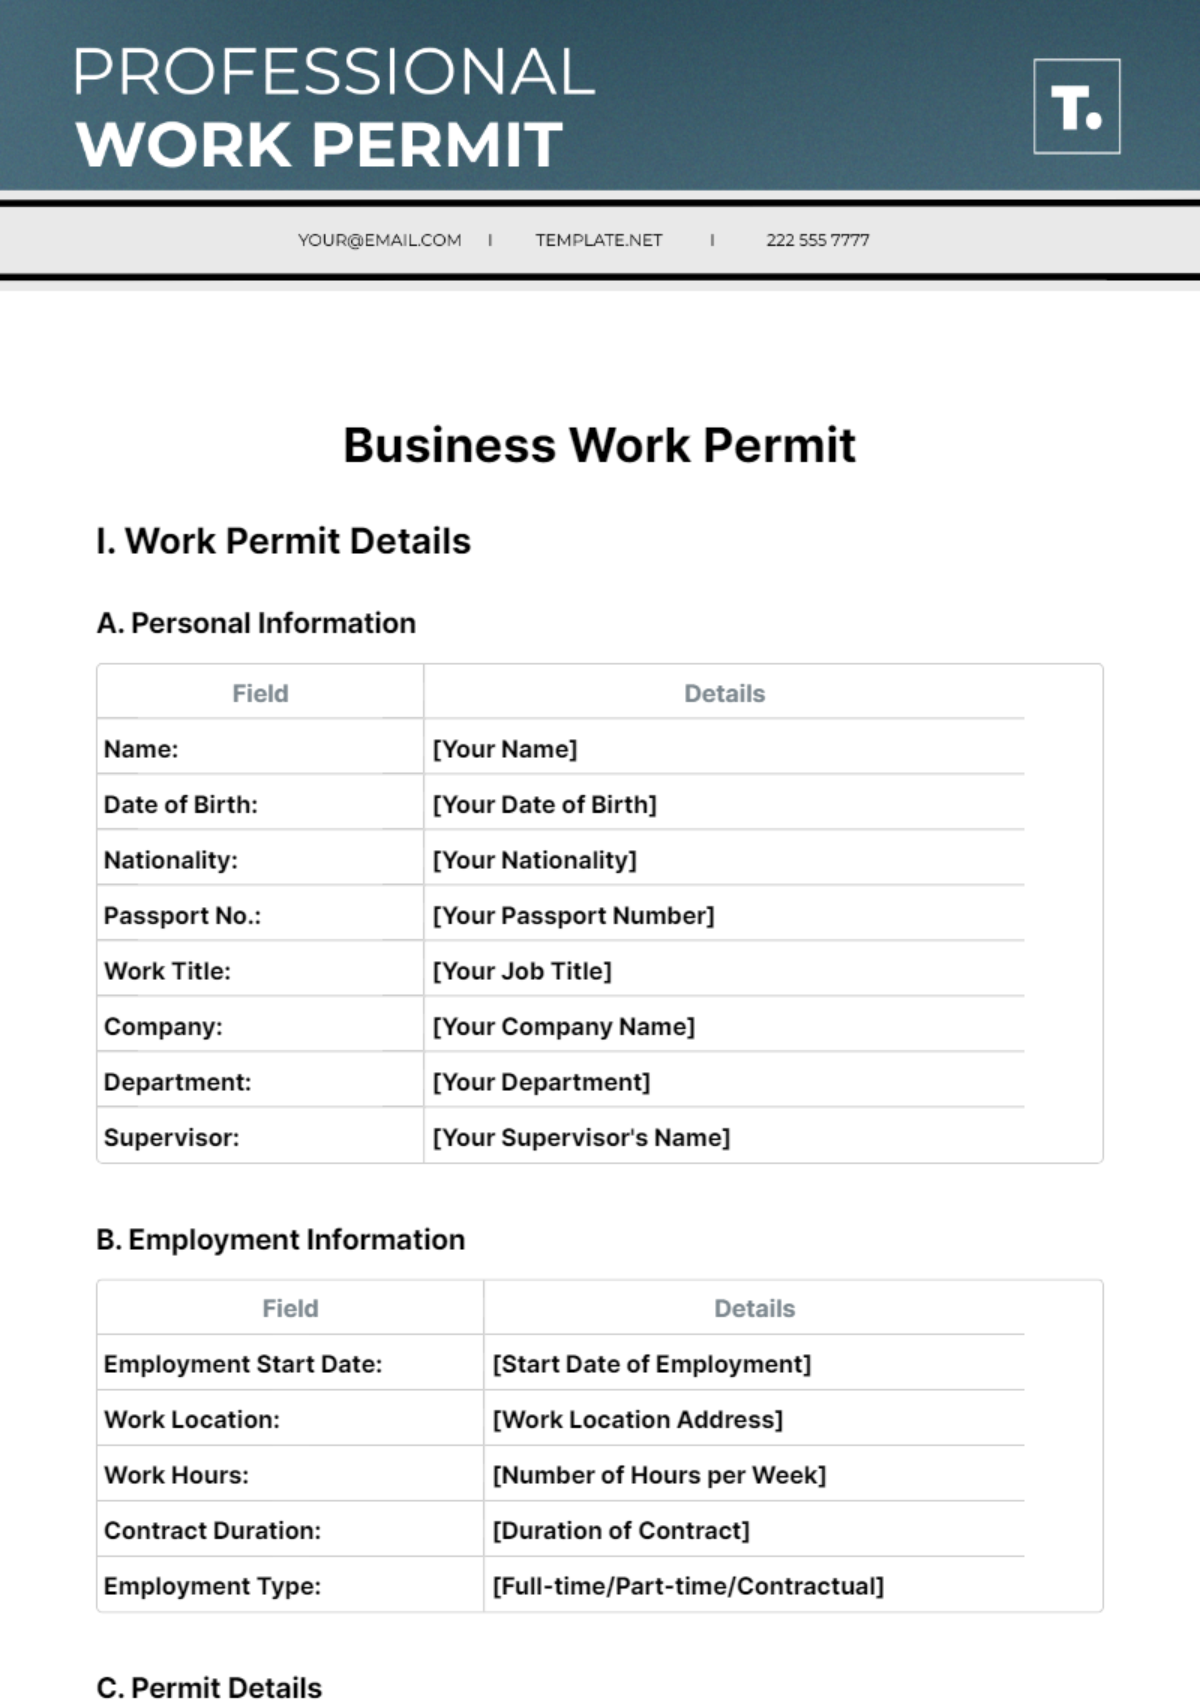 Business Work Permit Template